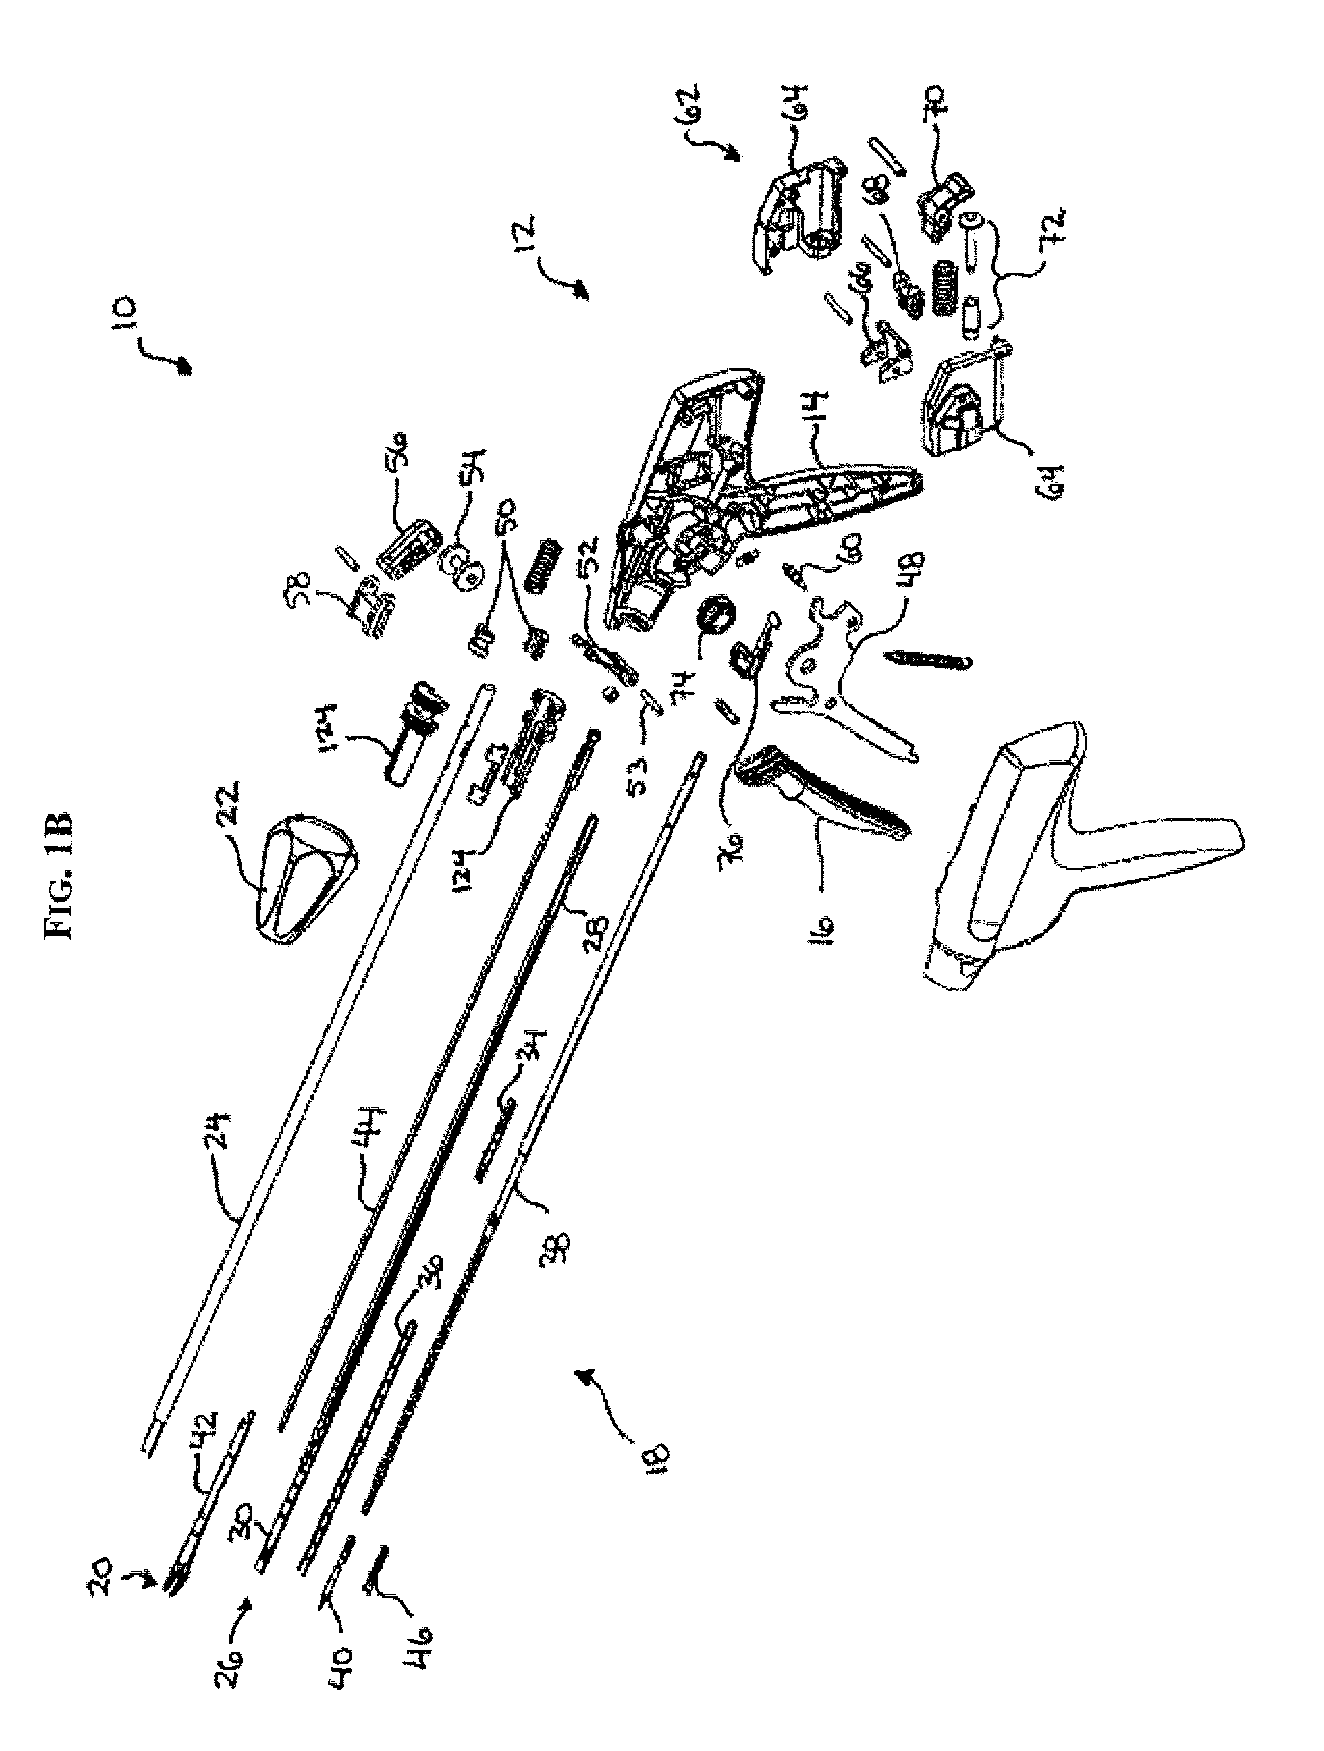 Surgical clip advancement and alignment mechanism